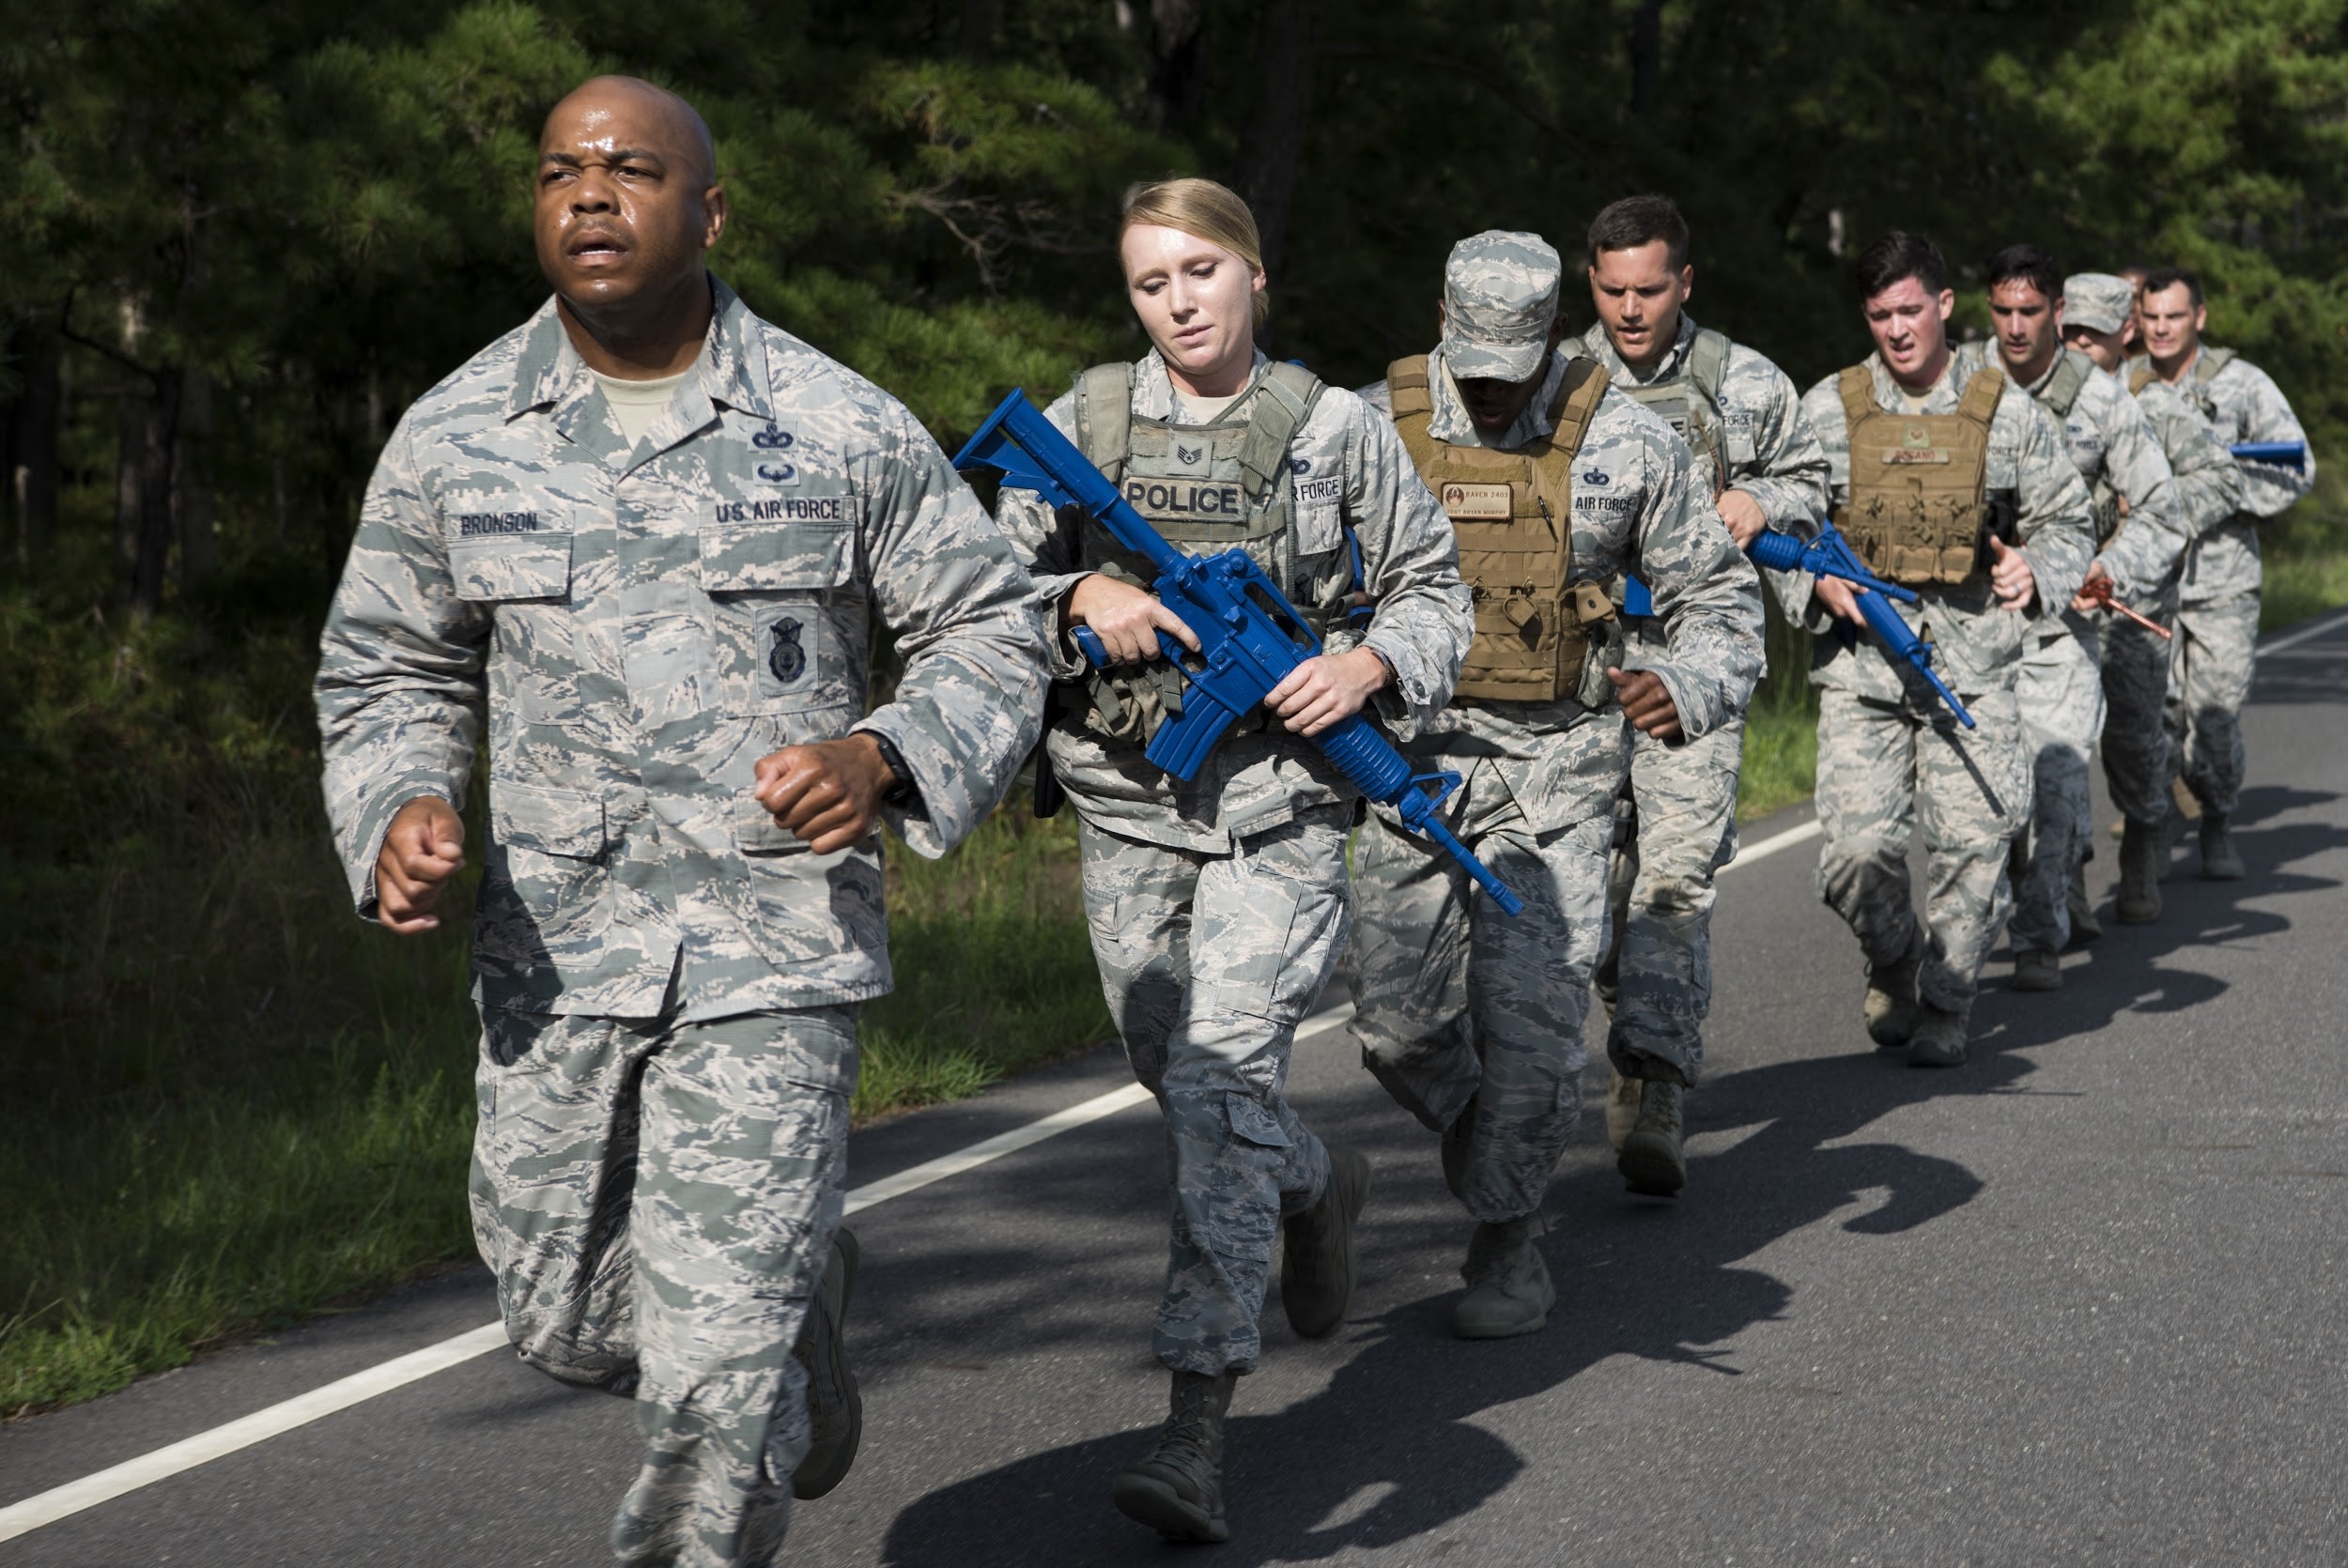 How to Make Air Force Bases Safer and Security Forces Happier